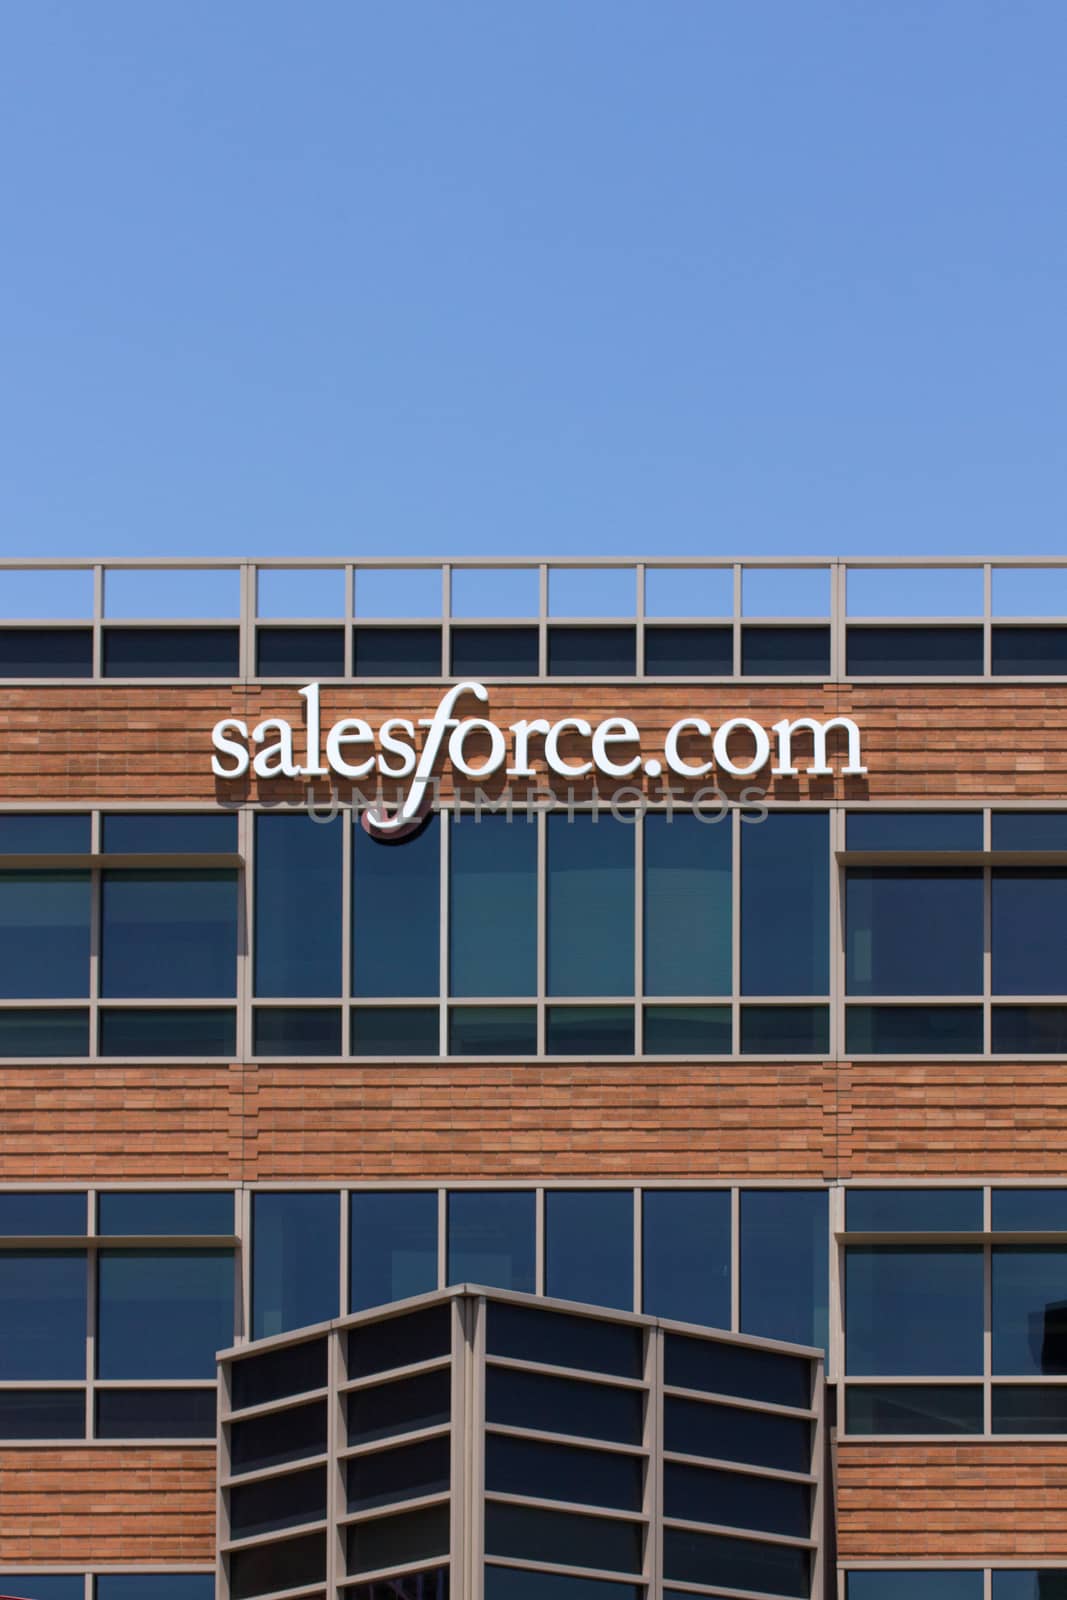 SAN FRANCISCO, CA/USA - MAY 31, 2014: Salesforce.com corporate headquarters. Salesforce.com Inc. is a global cloud computing company headquartered in San Francisco, California known for its customer relationship management (CRM) product.